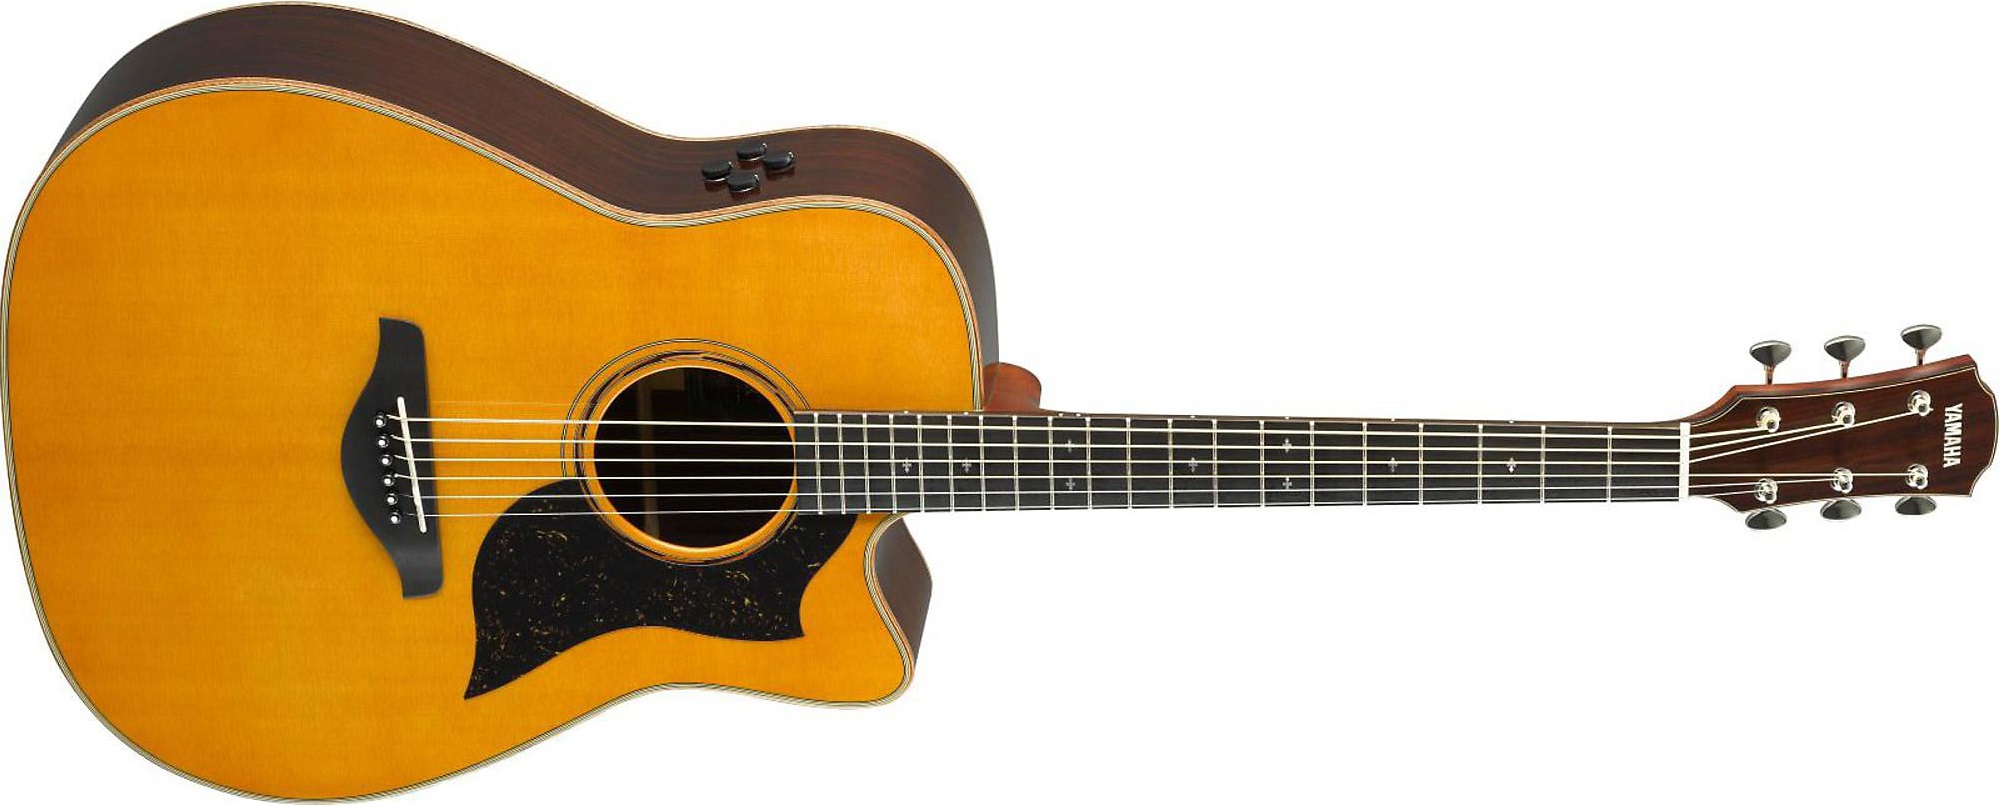 Yamaha A5R ARE Dreadnought Acoustic-Electric Guitar on a white background